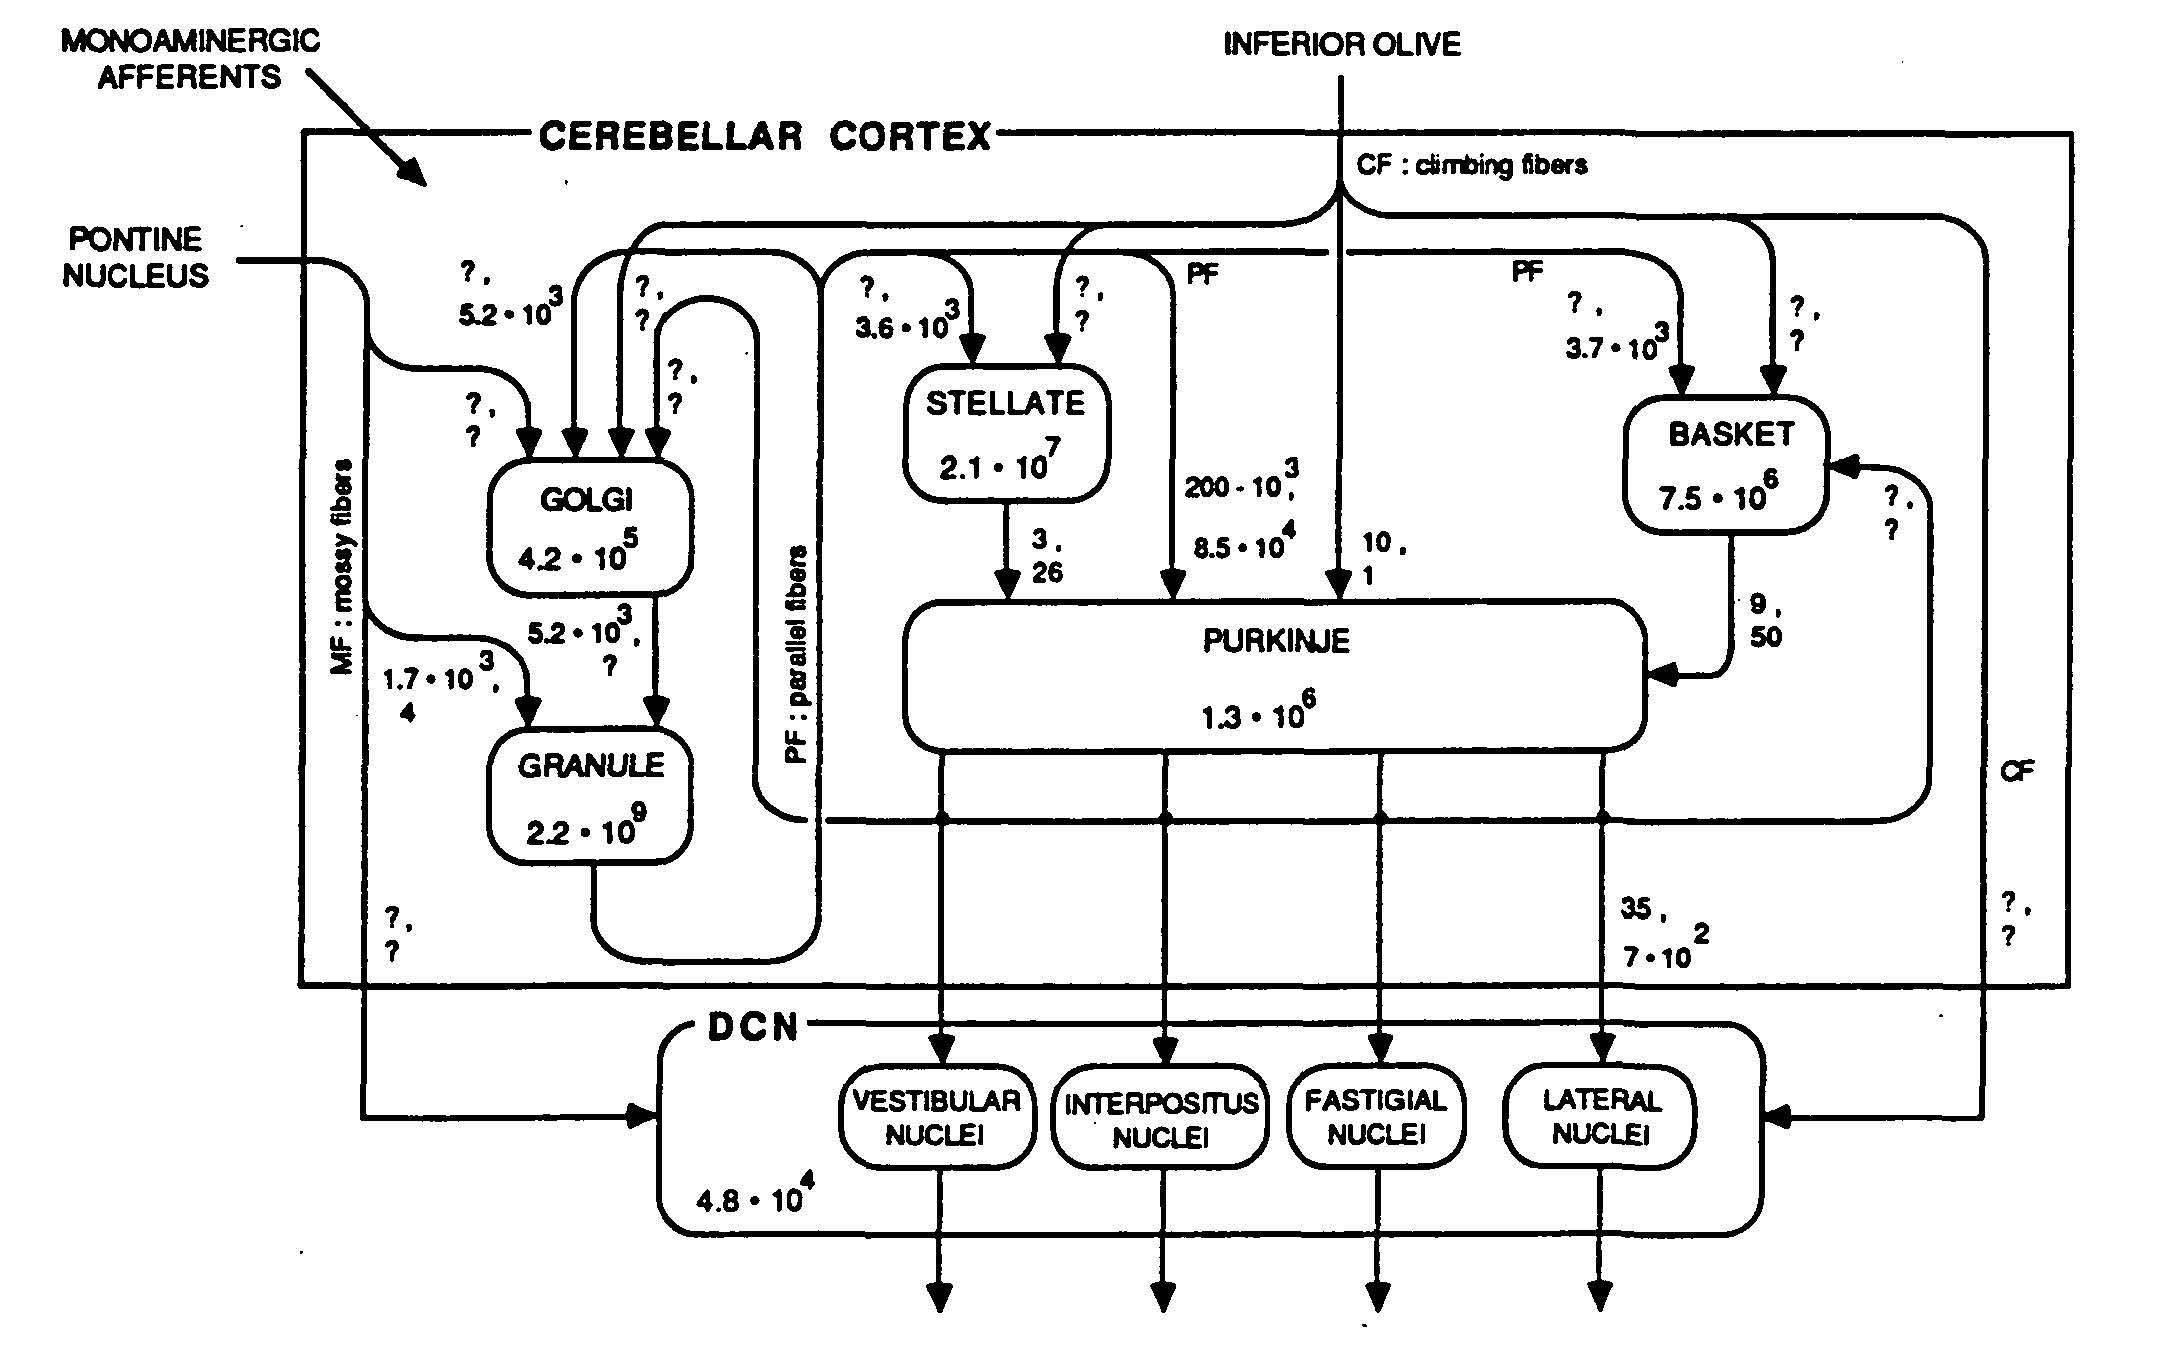 Fig 2. from Loebner, 1989.